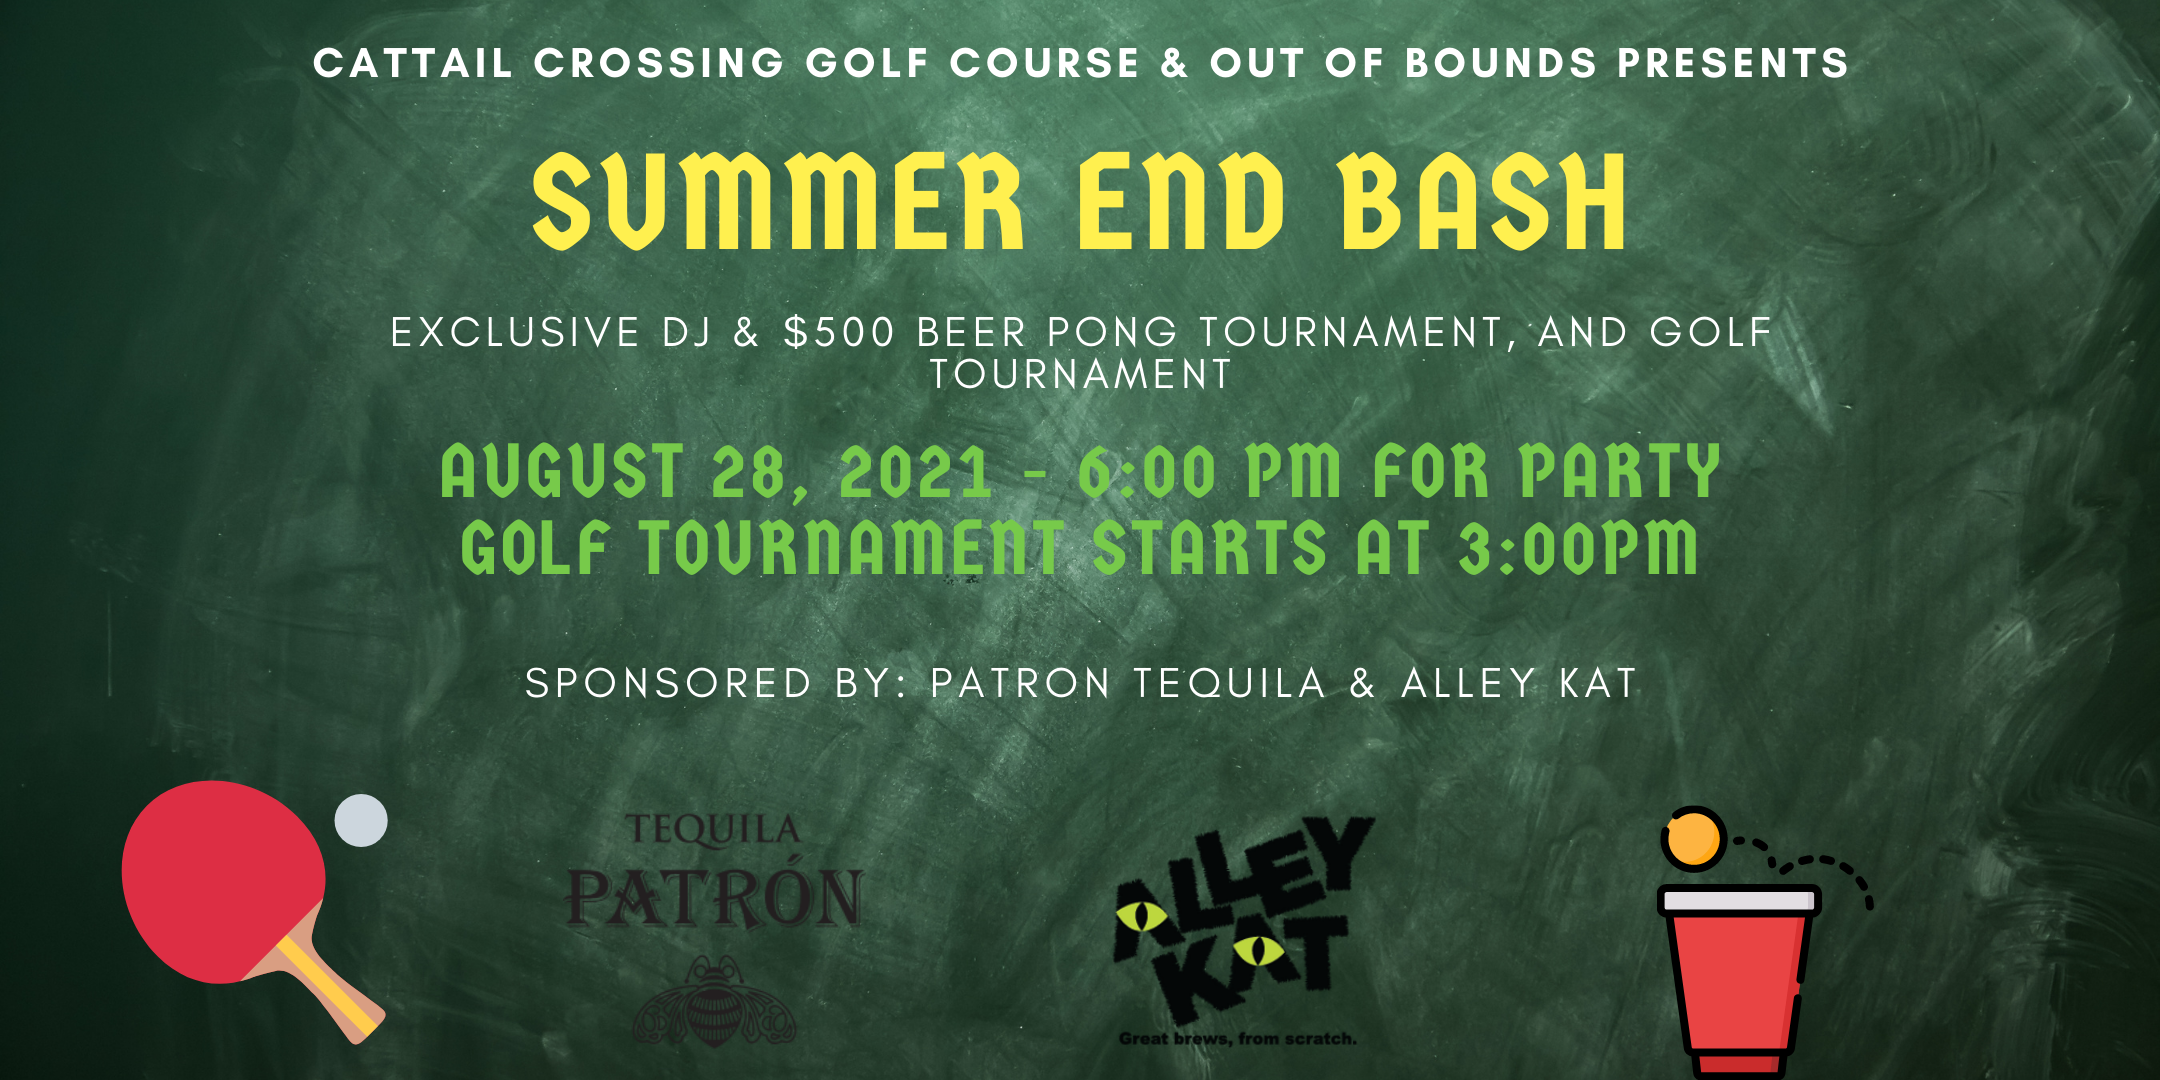 Summer End Bash at the Cattail Crossing Golf & Winter club